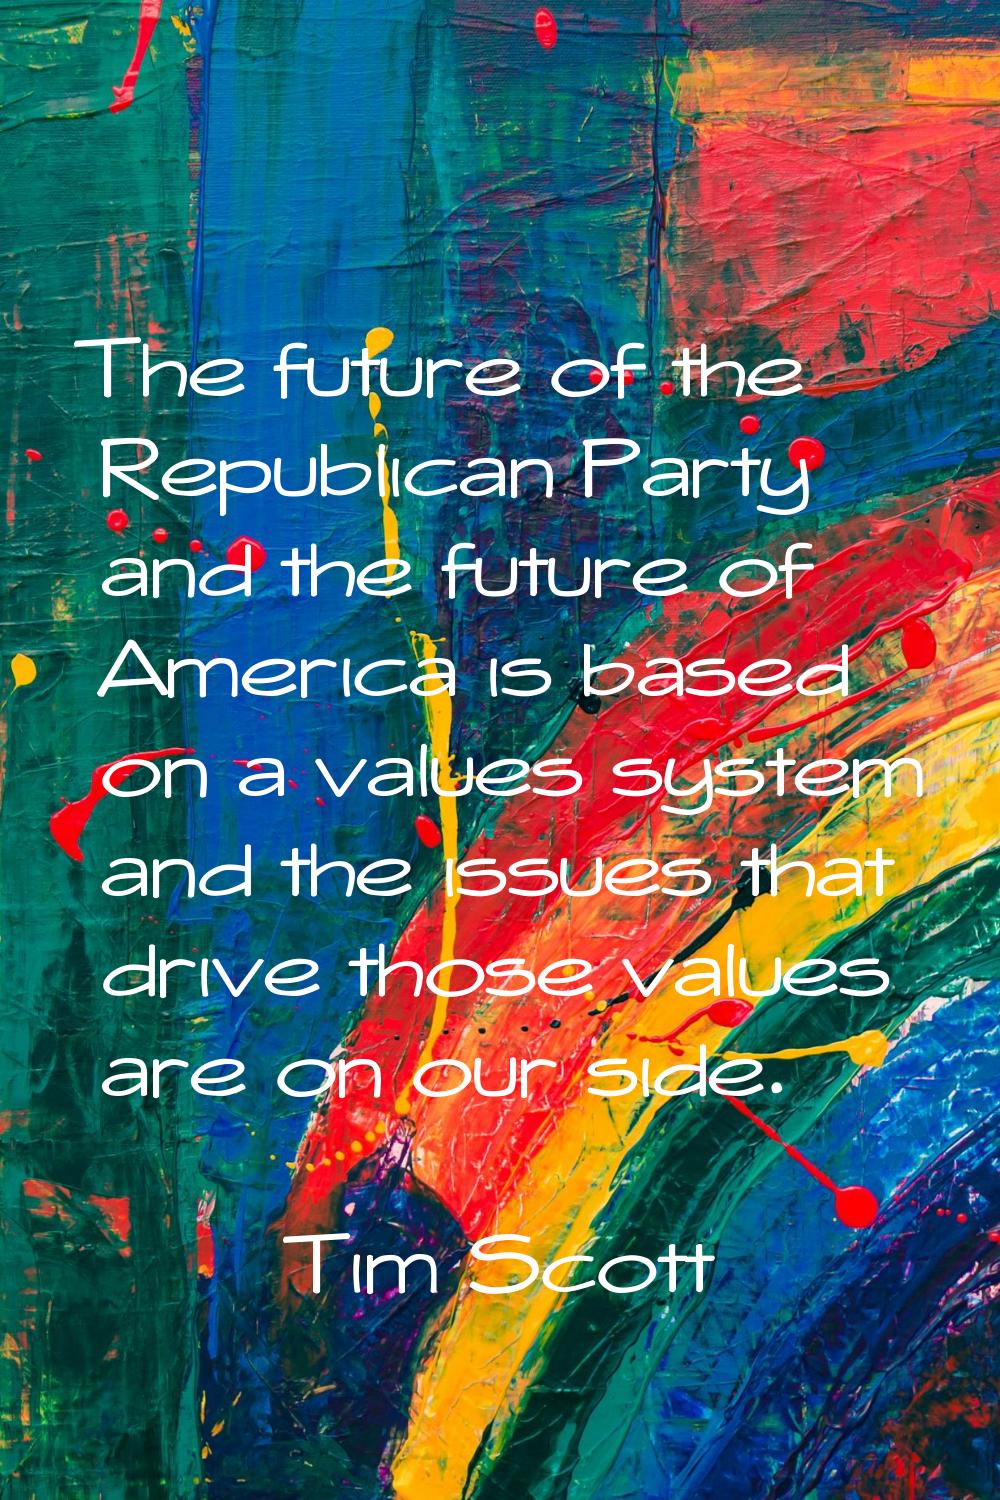 The future of the Republican Party and the future of America is based on a values system and the is